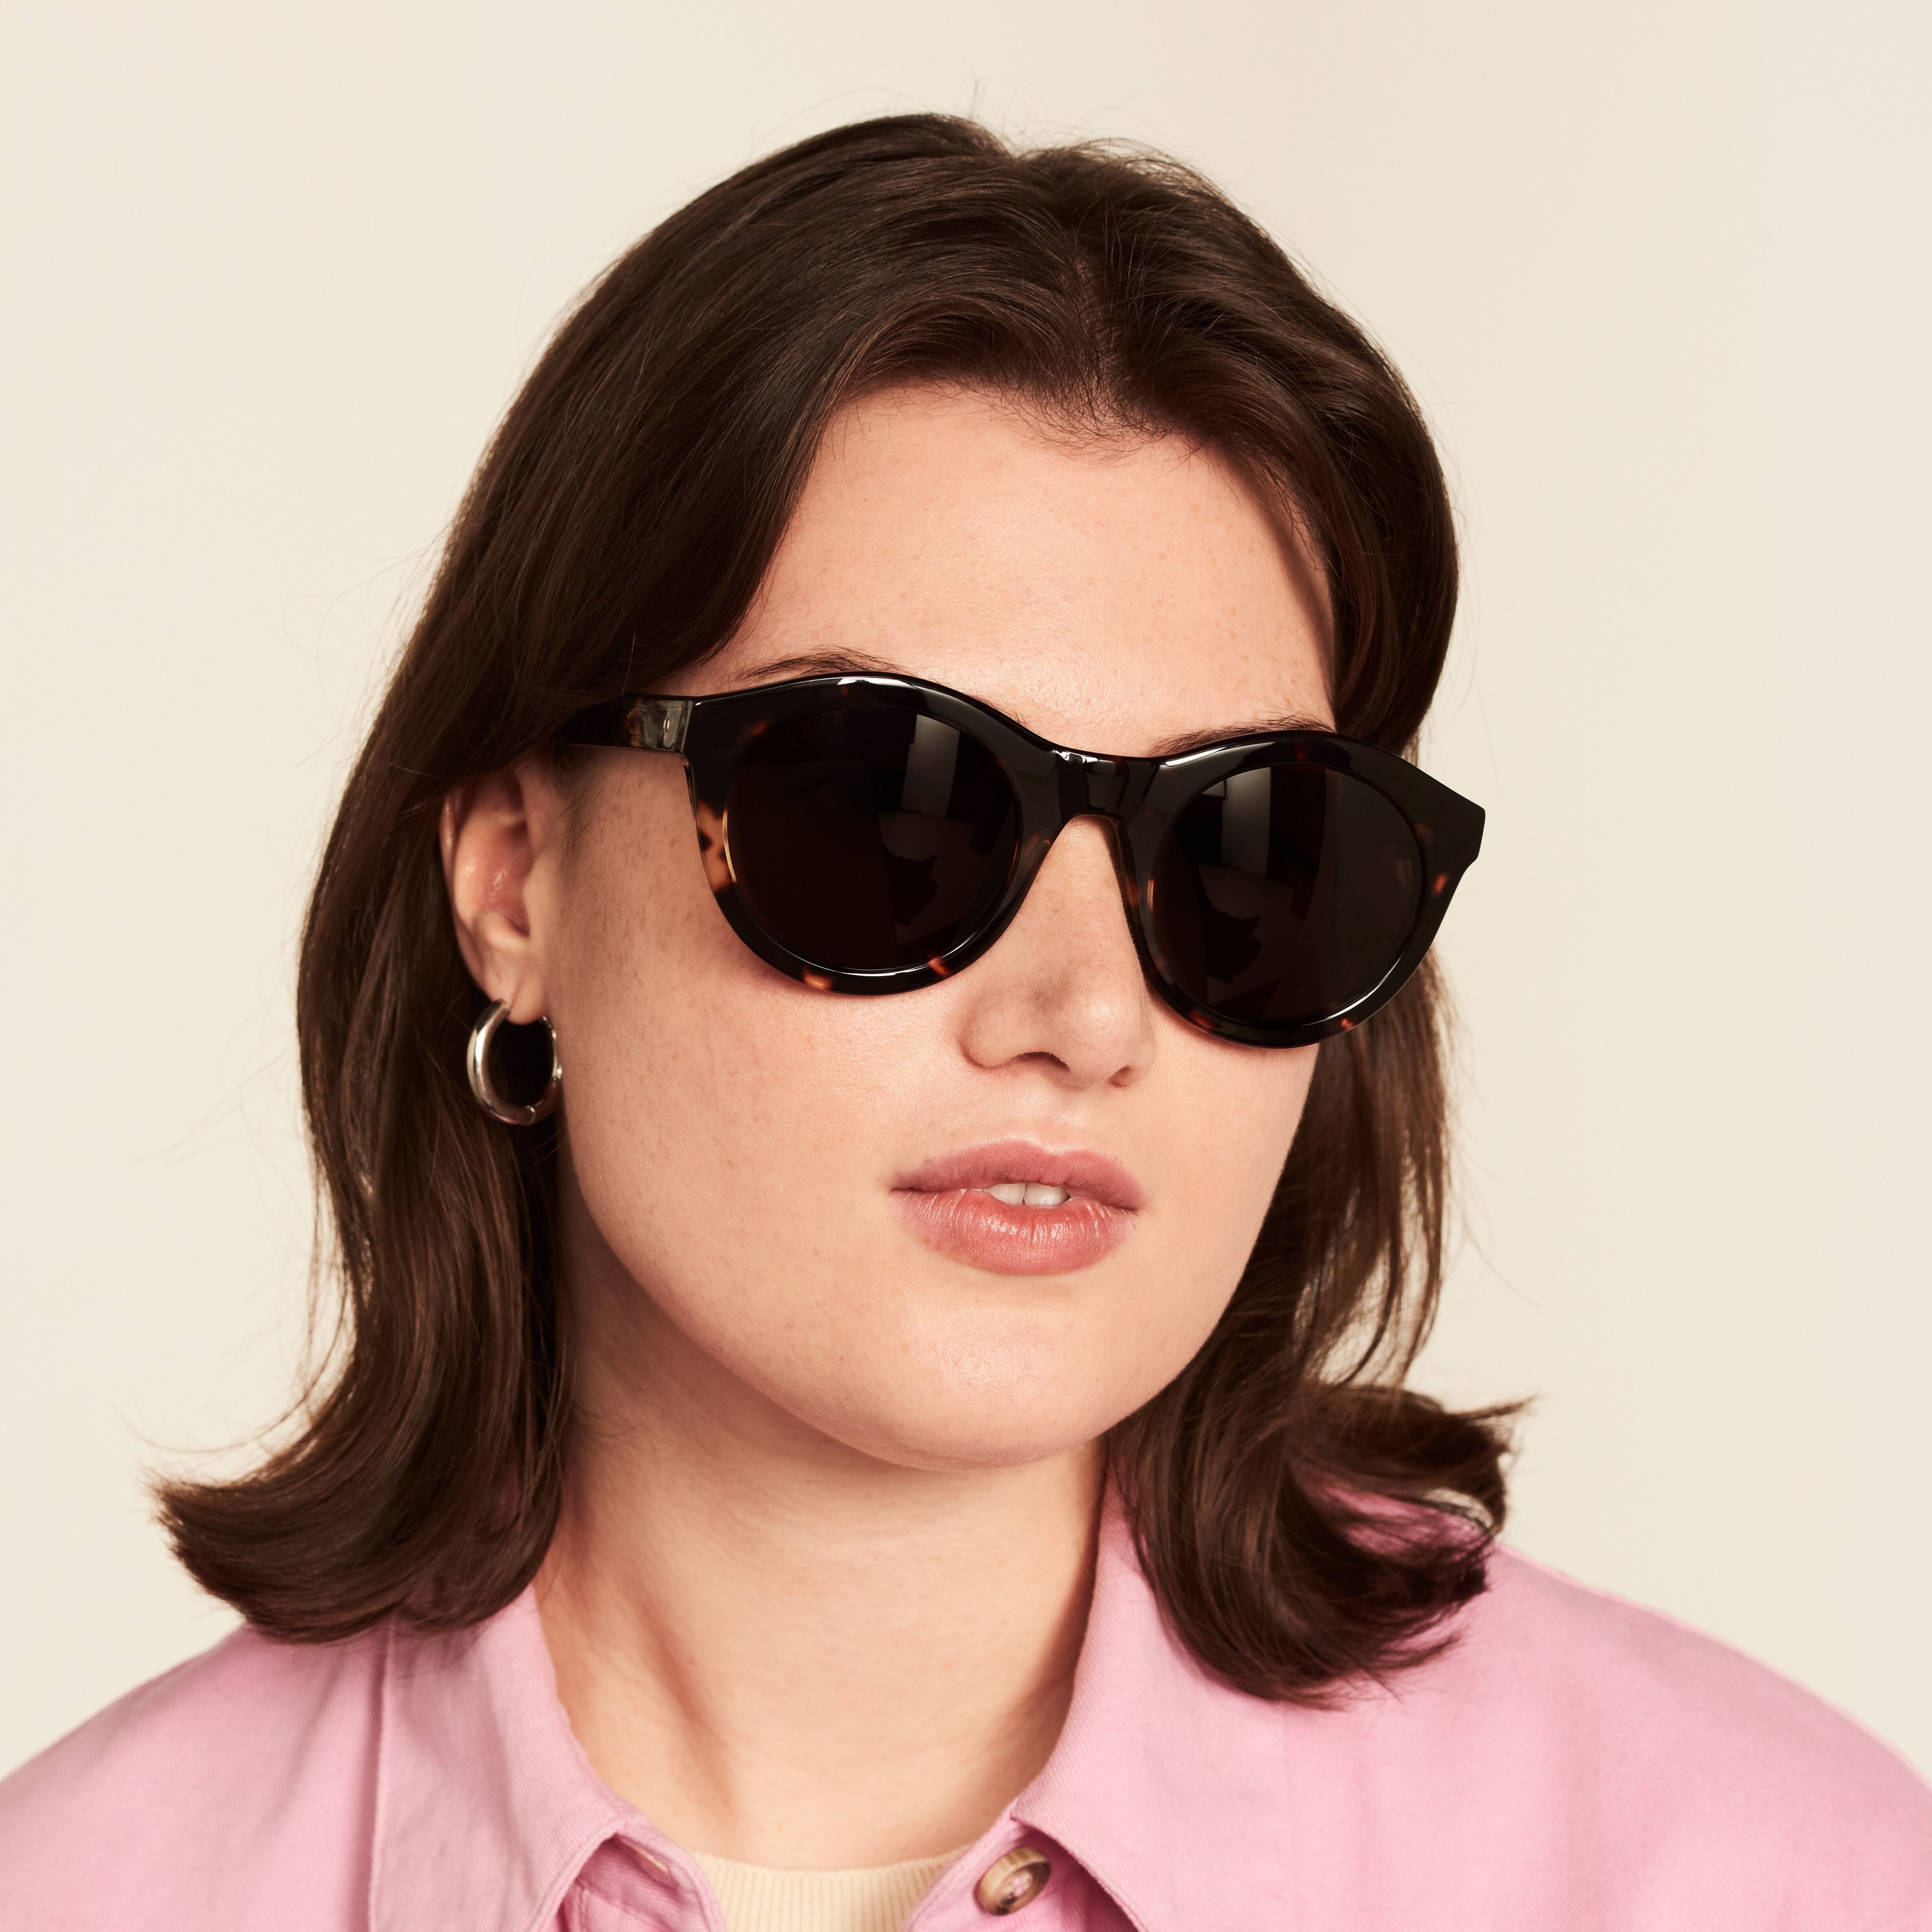 Ace & Tate Sunglasses | Round Acetate in Brown